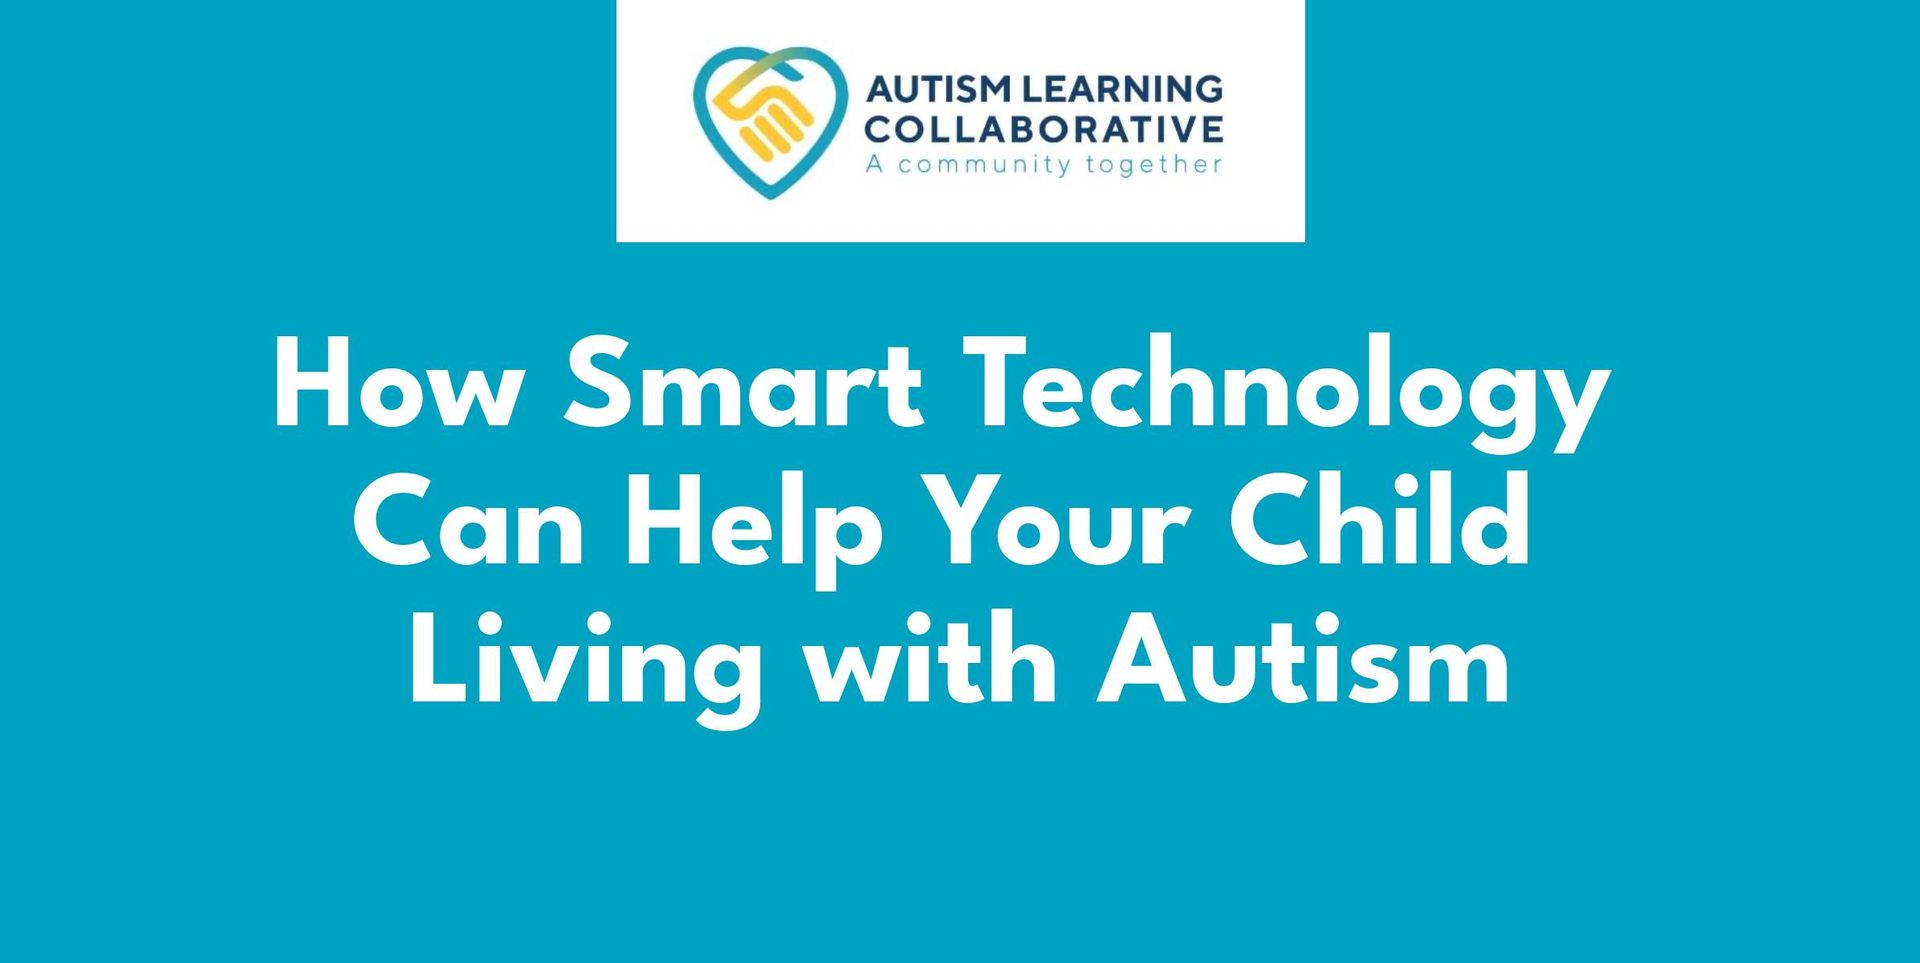 Autism Smart Technology | How Technology Can Help With Autism